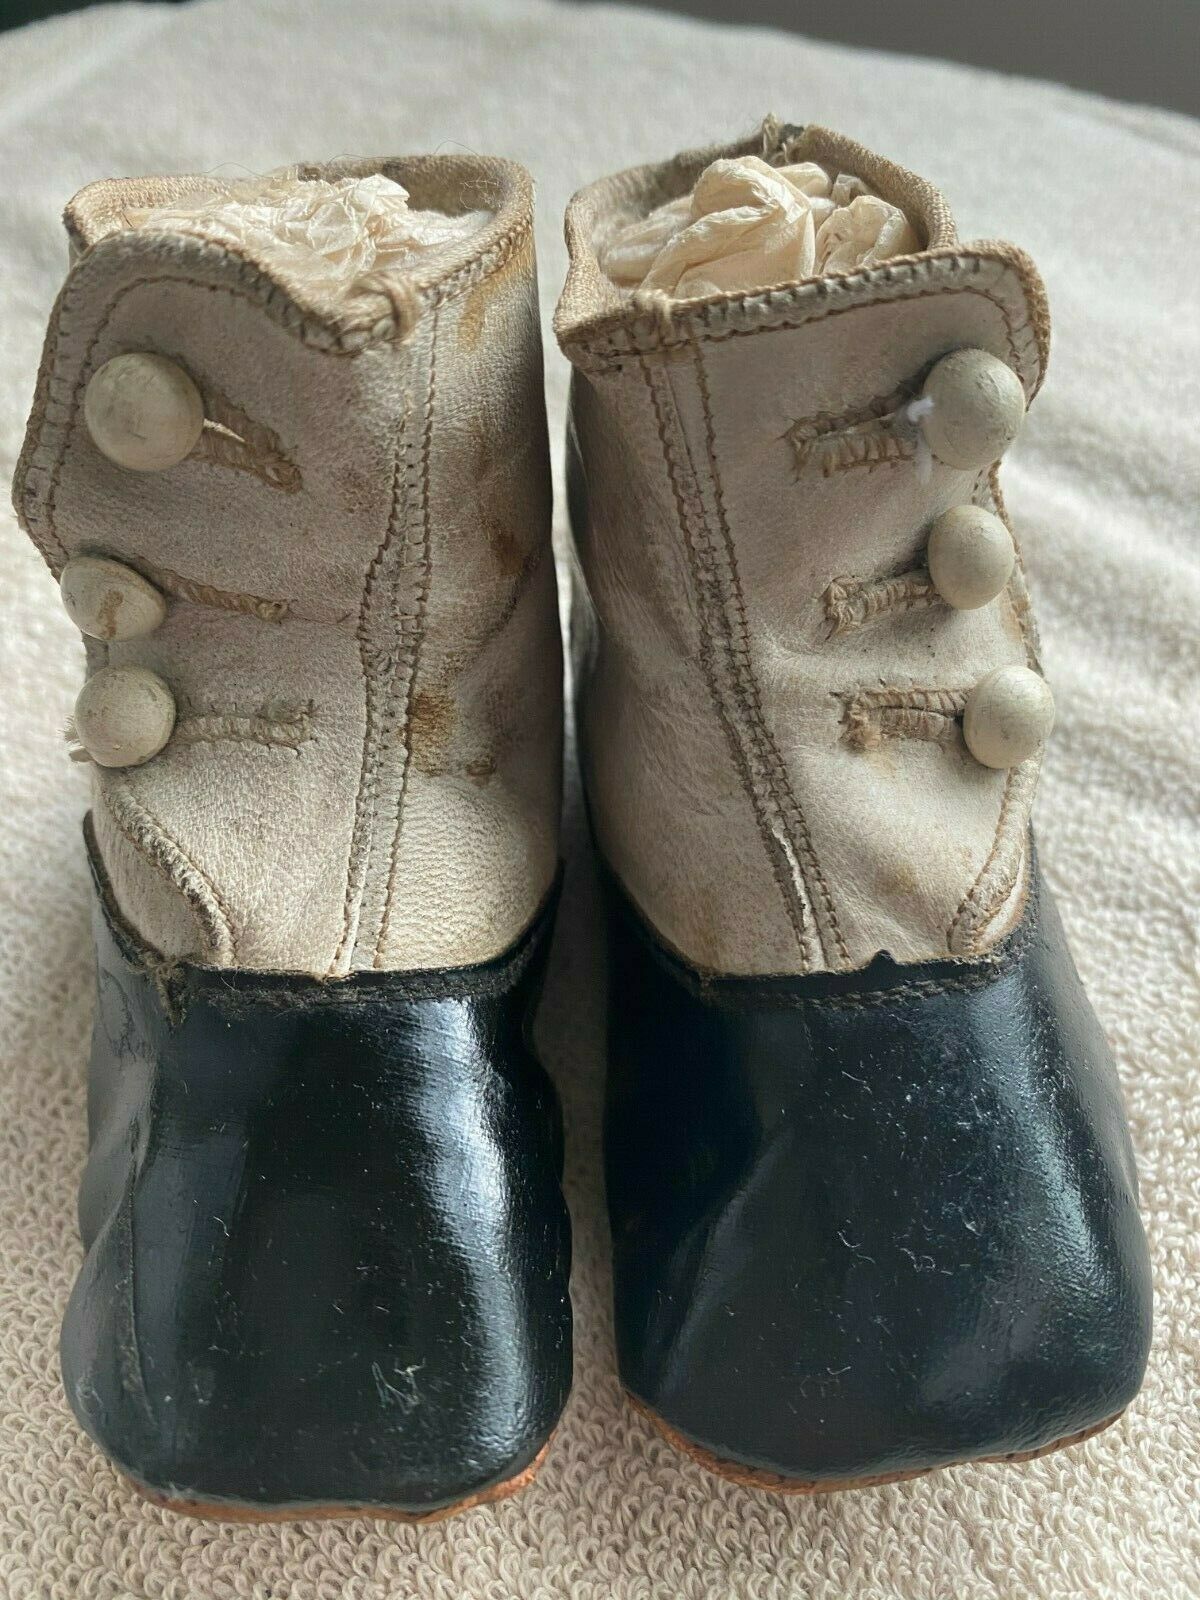 Antique Baby Black/white Leather Button-up Shoes, Very Good Condition!